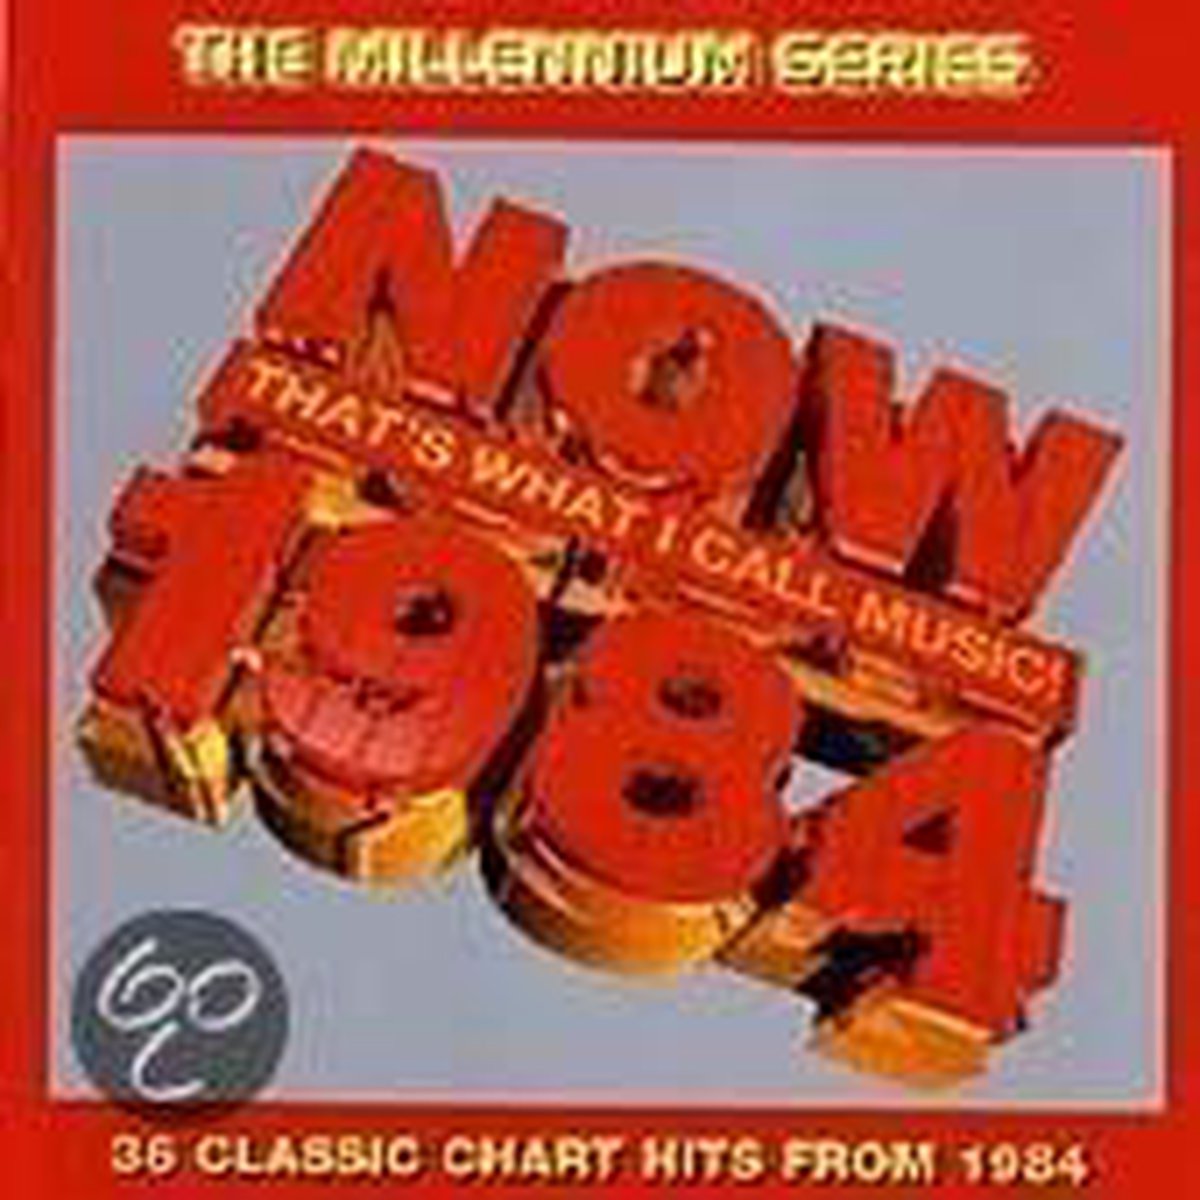 Now That's What I Call Music! 1984 - various artists